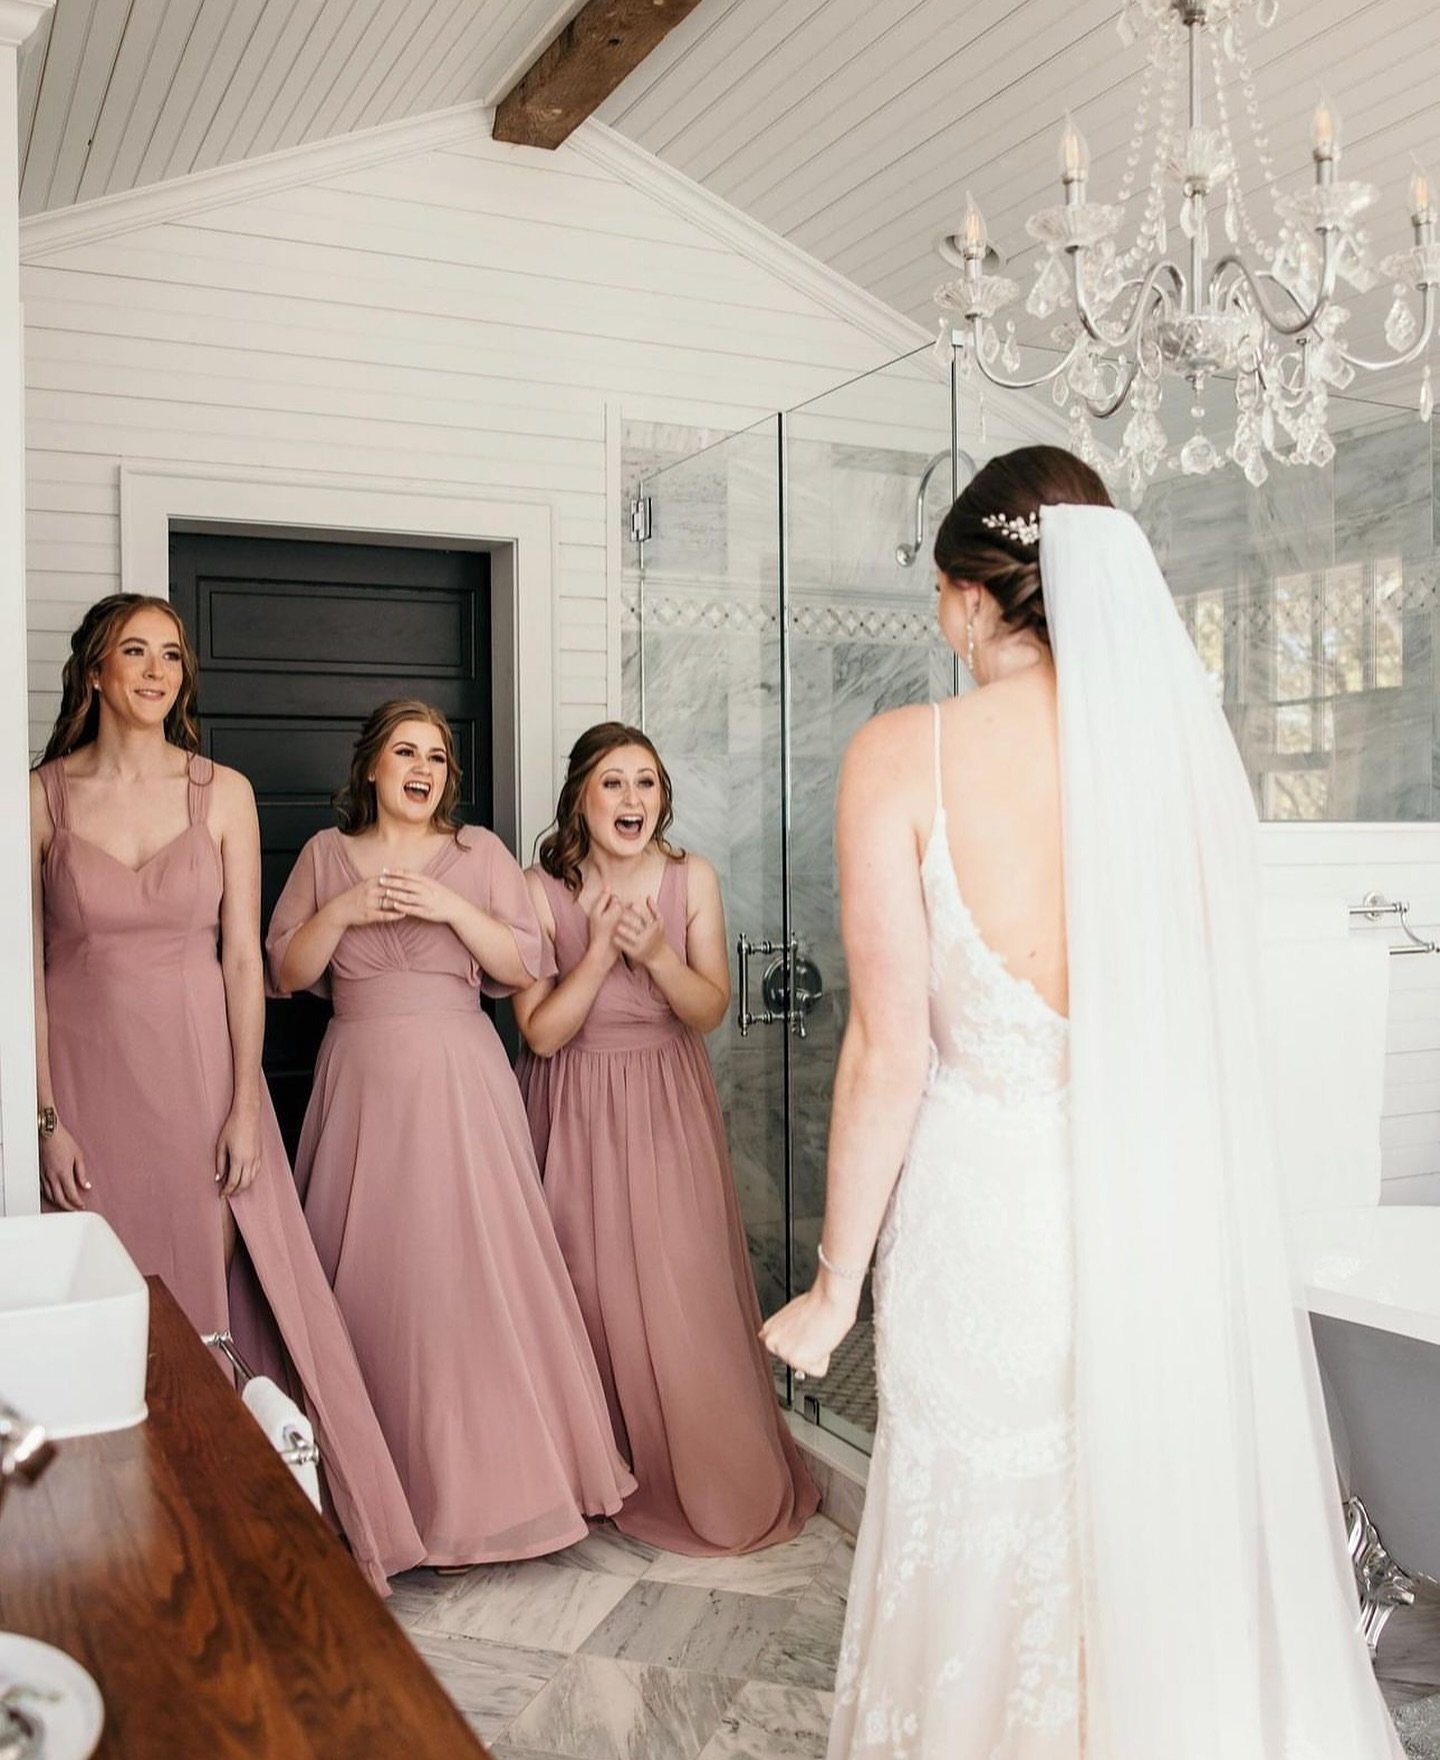 We&rsquo;d be lying if we said we didn&rsquo;t have the same reaction to our real bride Kristina on her special day. The memories made here at #TheKinsleeshopFarm are so dear to our hearts!

#wedding #weddings #weddingday #weddingvibes #weddingdream 